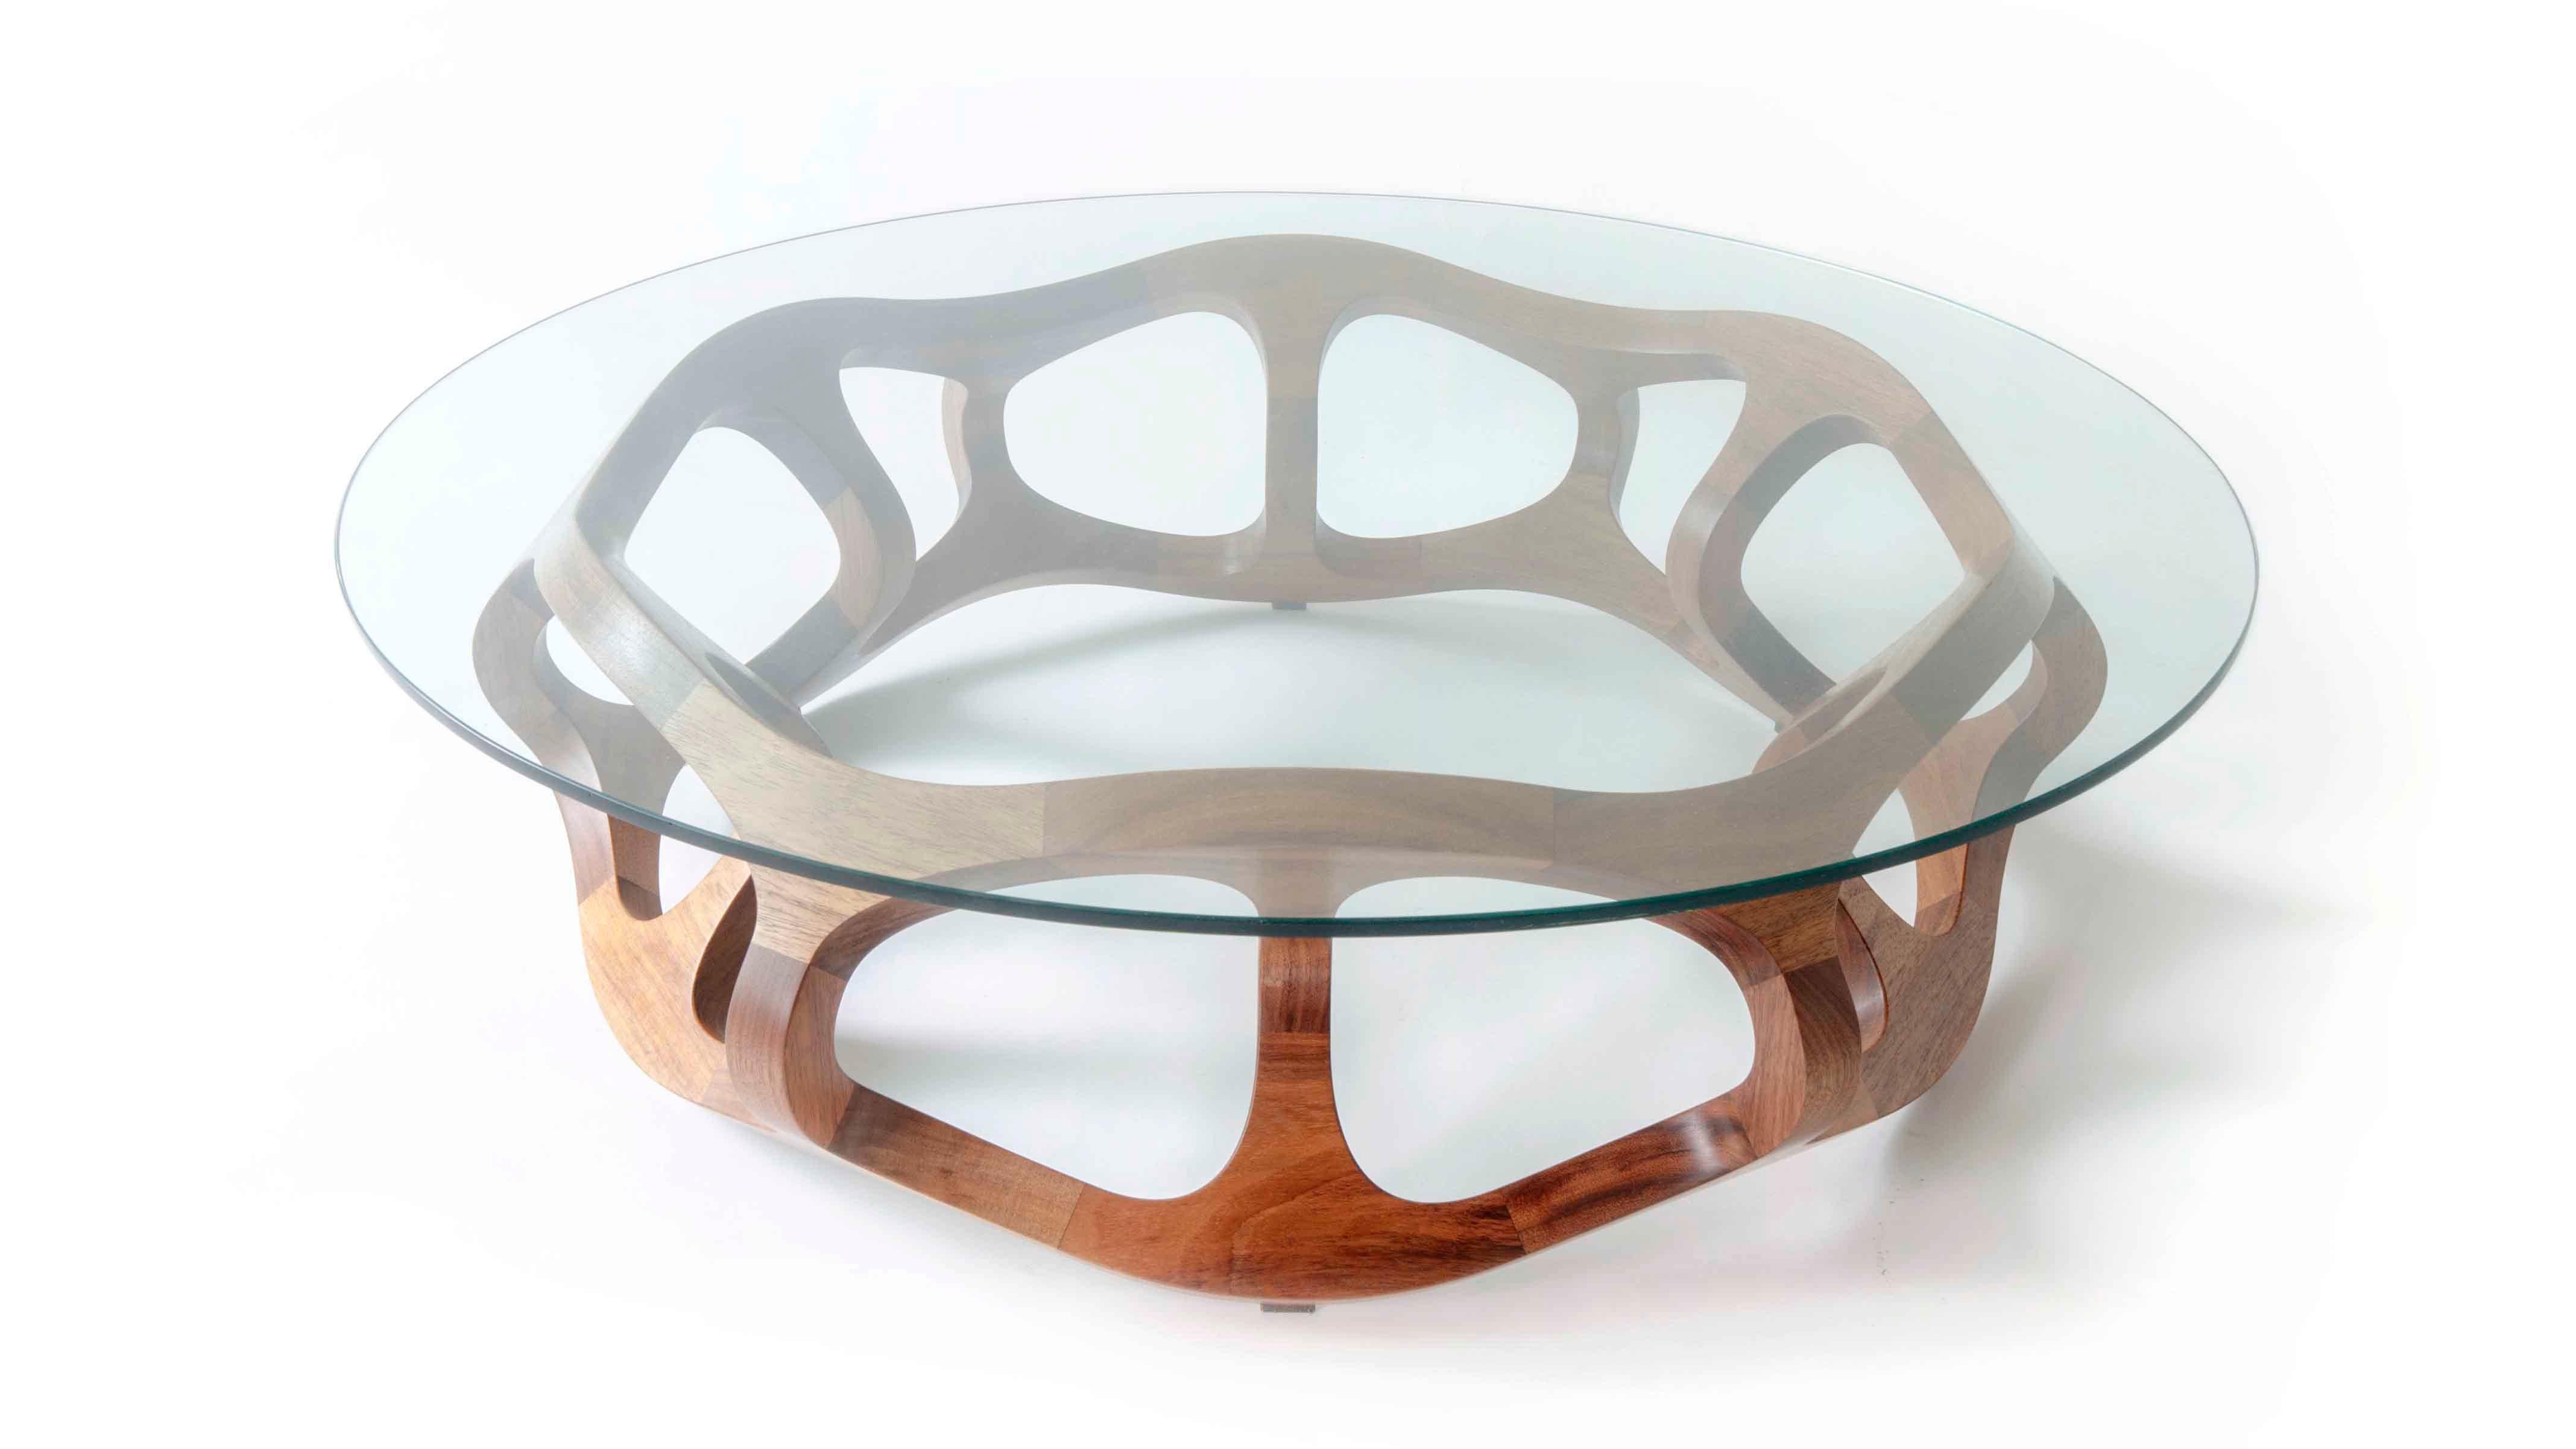 Toro G6, Geometric Sculptural Center Table Made of Solid Wood by Pedro Cerisola For Sale 5